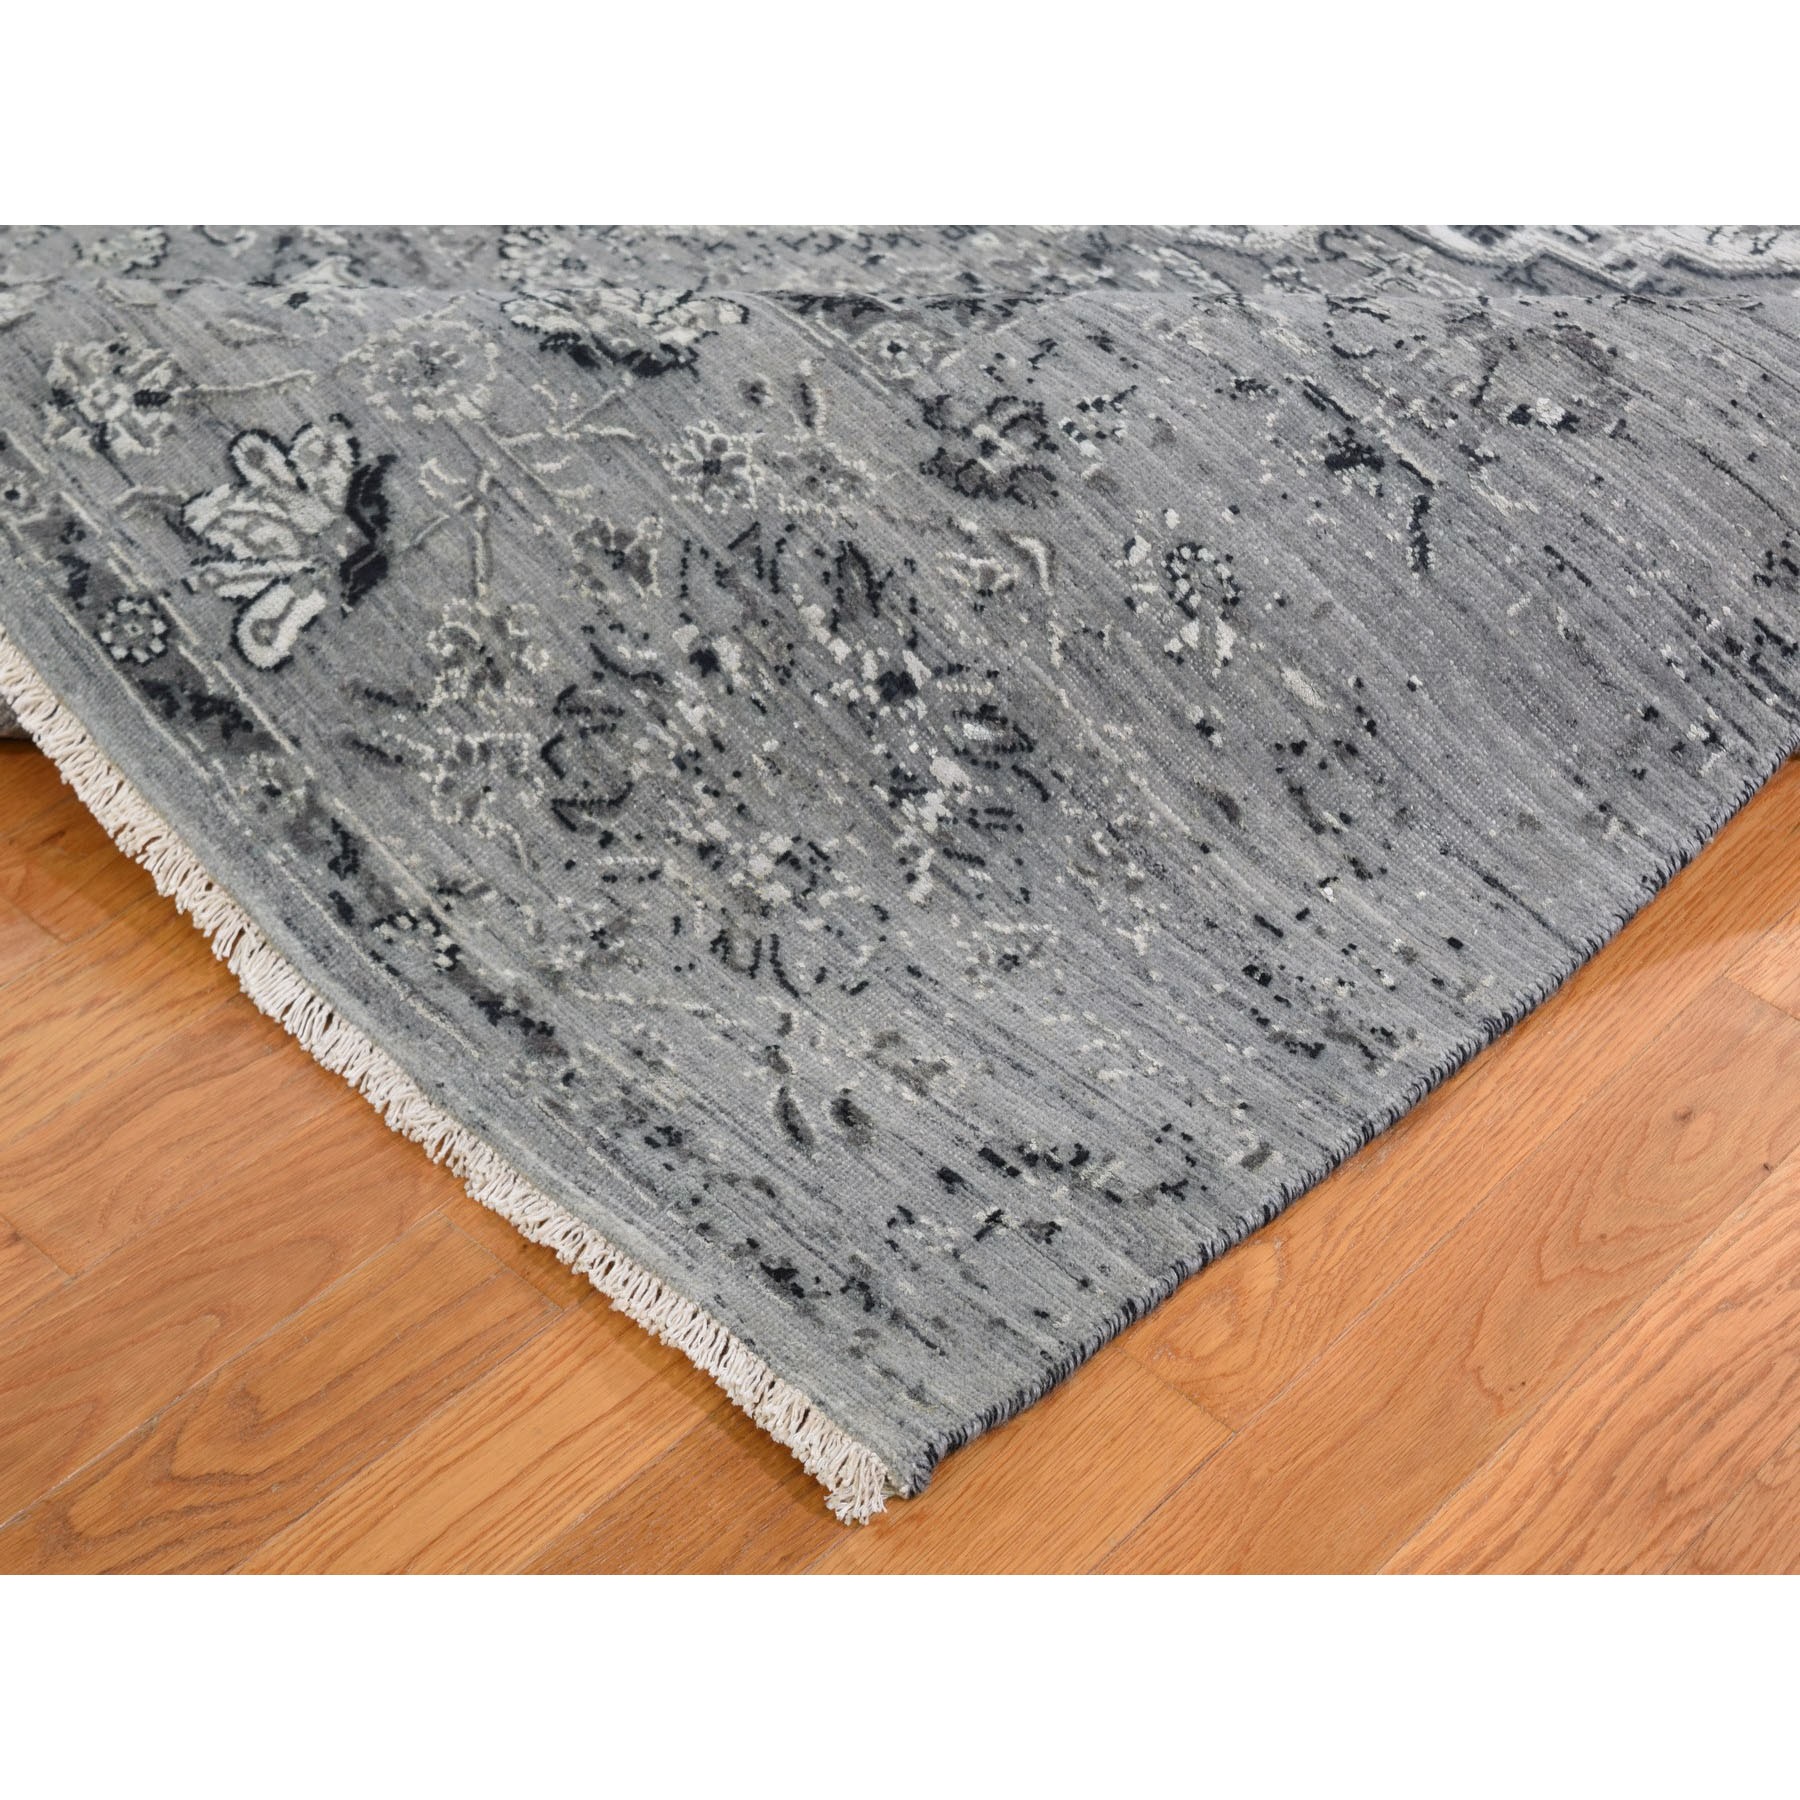 8-x10- Gray Broken Persian Erased Design Silk With Textured Wool Hand Knotted Oriental Rug 